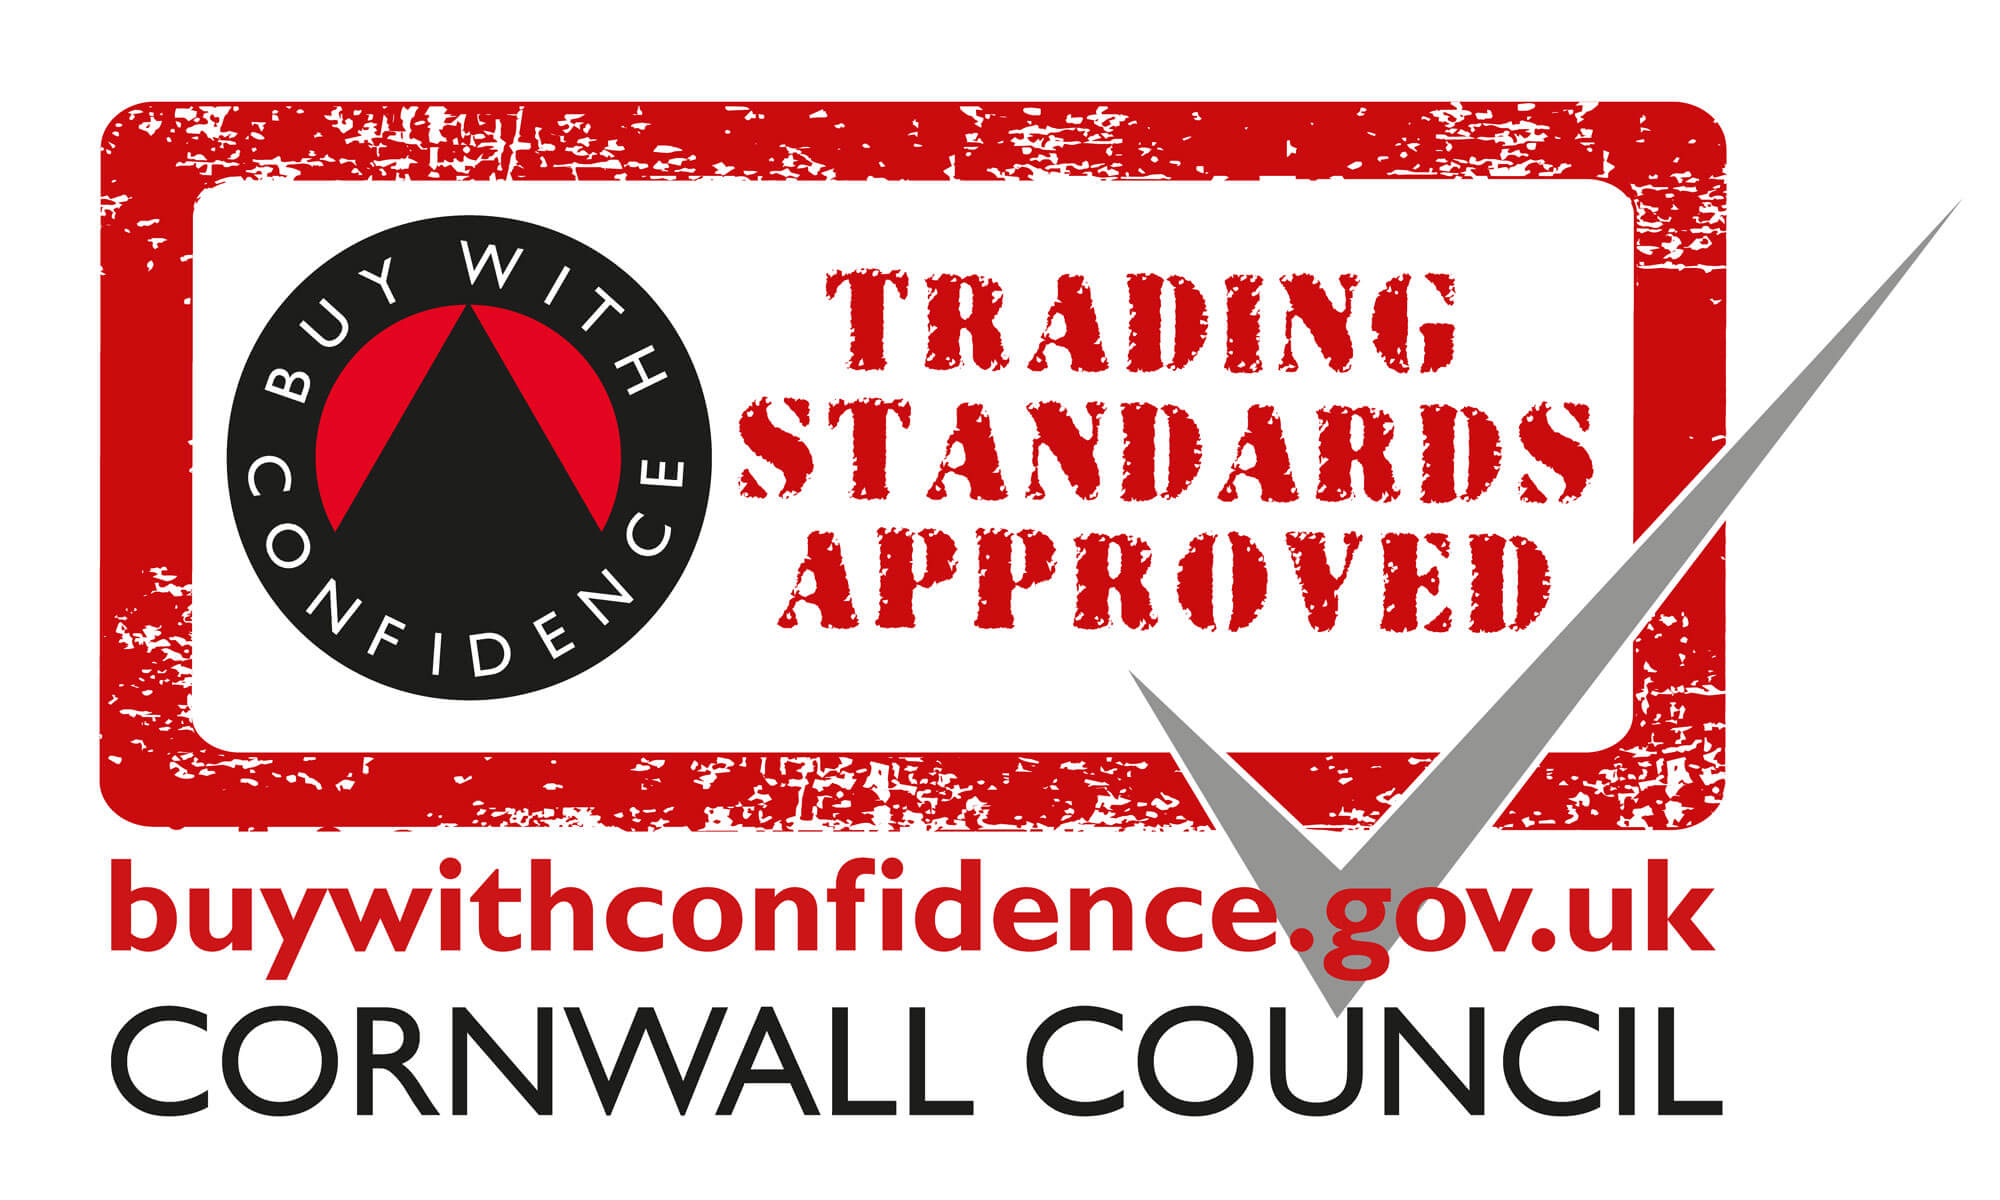 Trading standard approved.